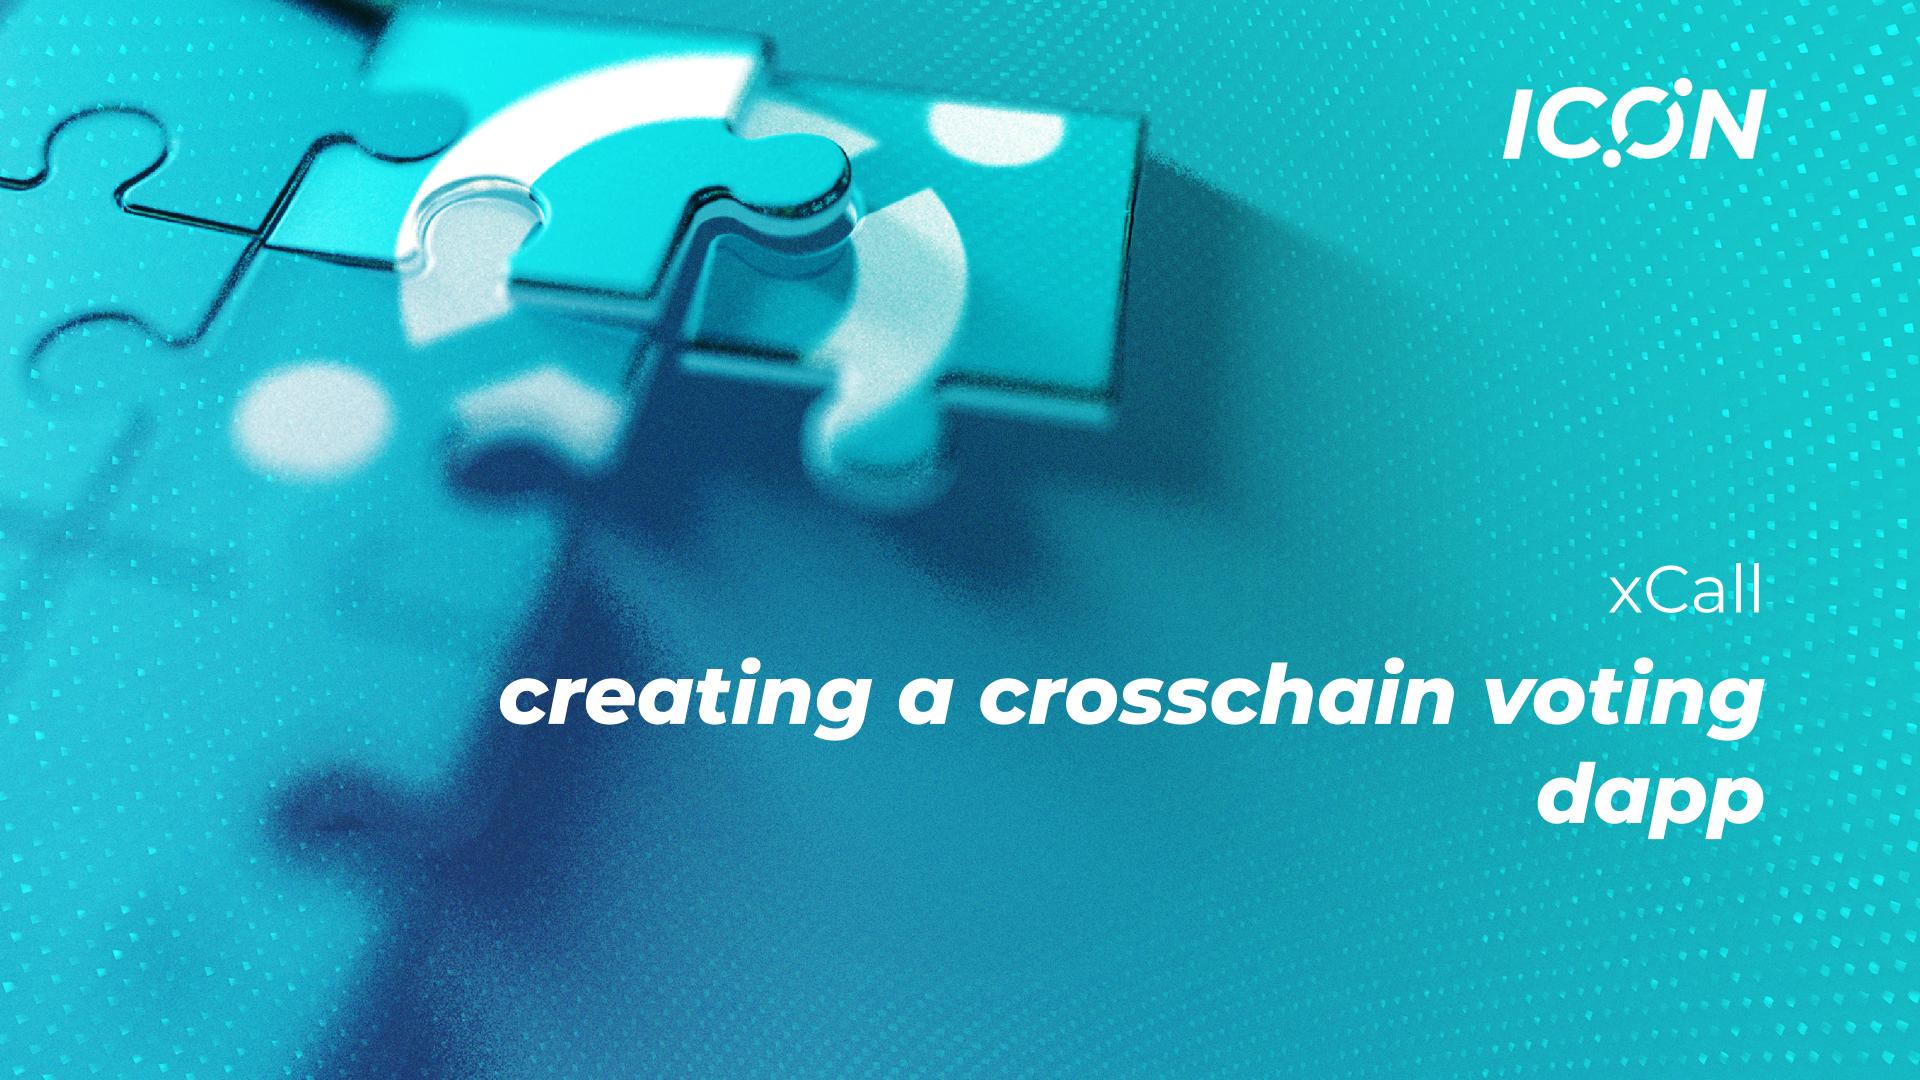 xcall tutorial part 1, creating a cross chain voting dapp. Developing the smart contracts